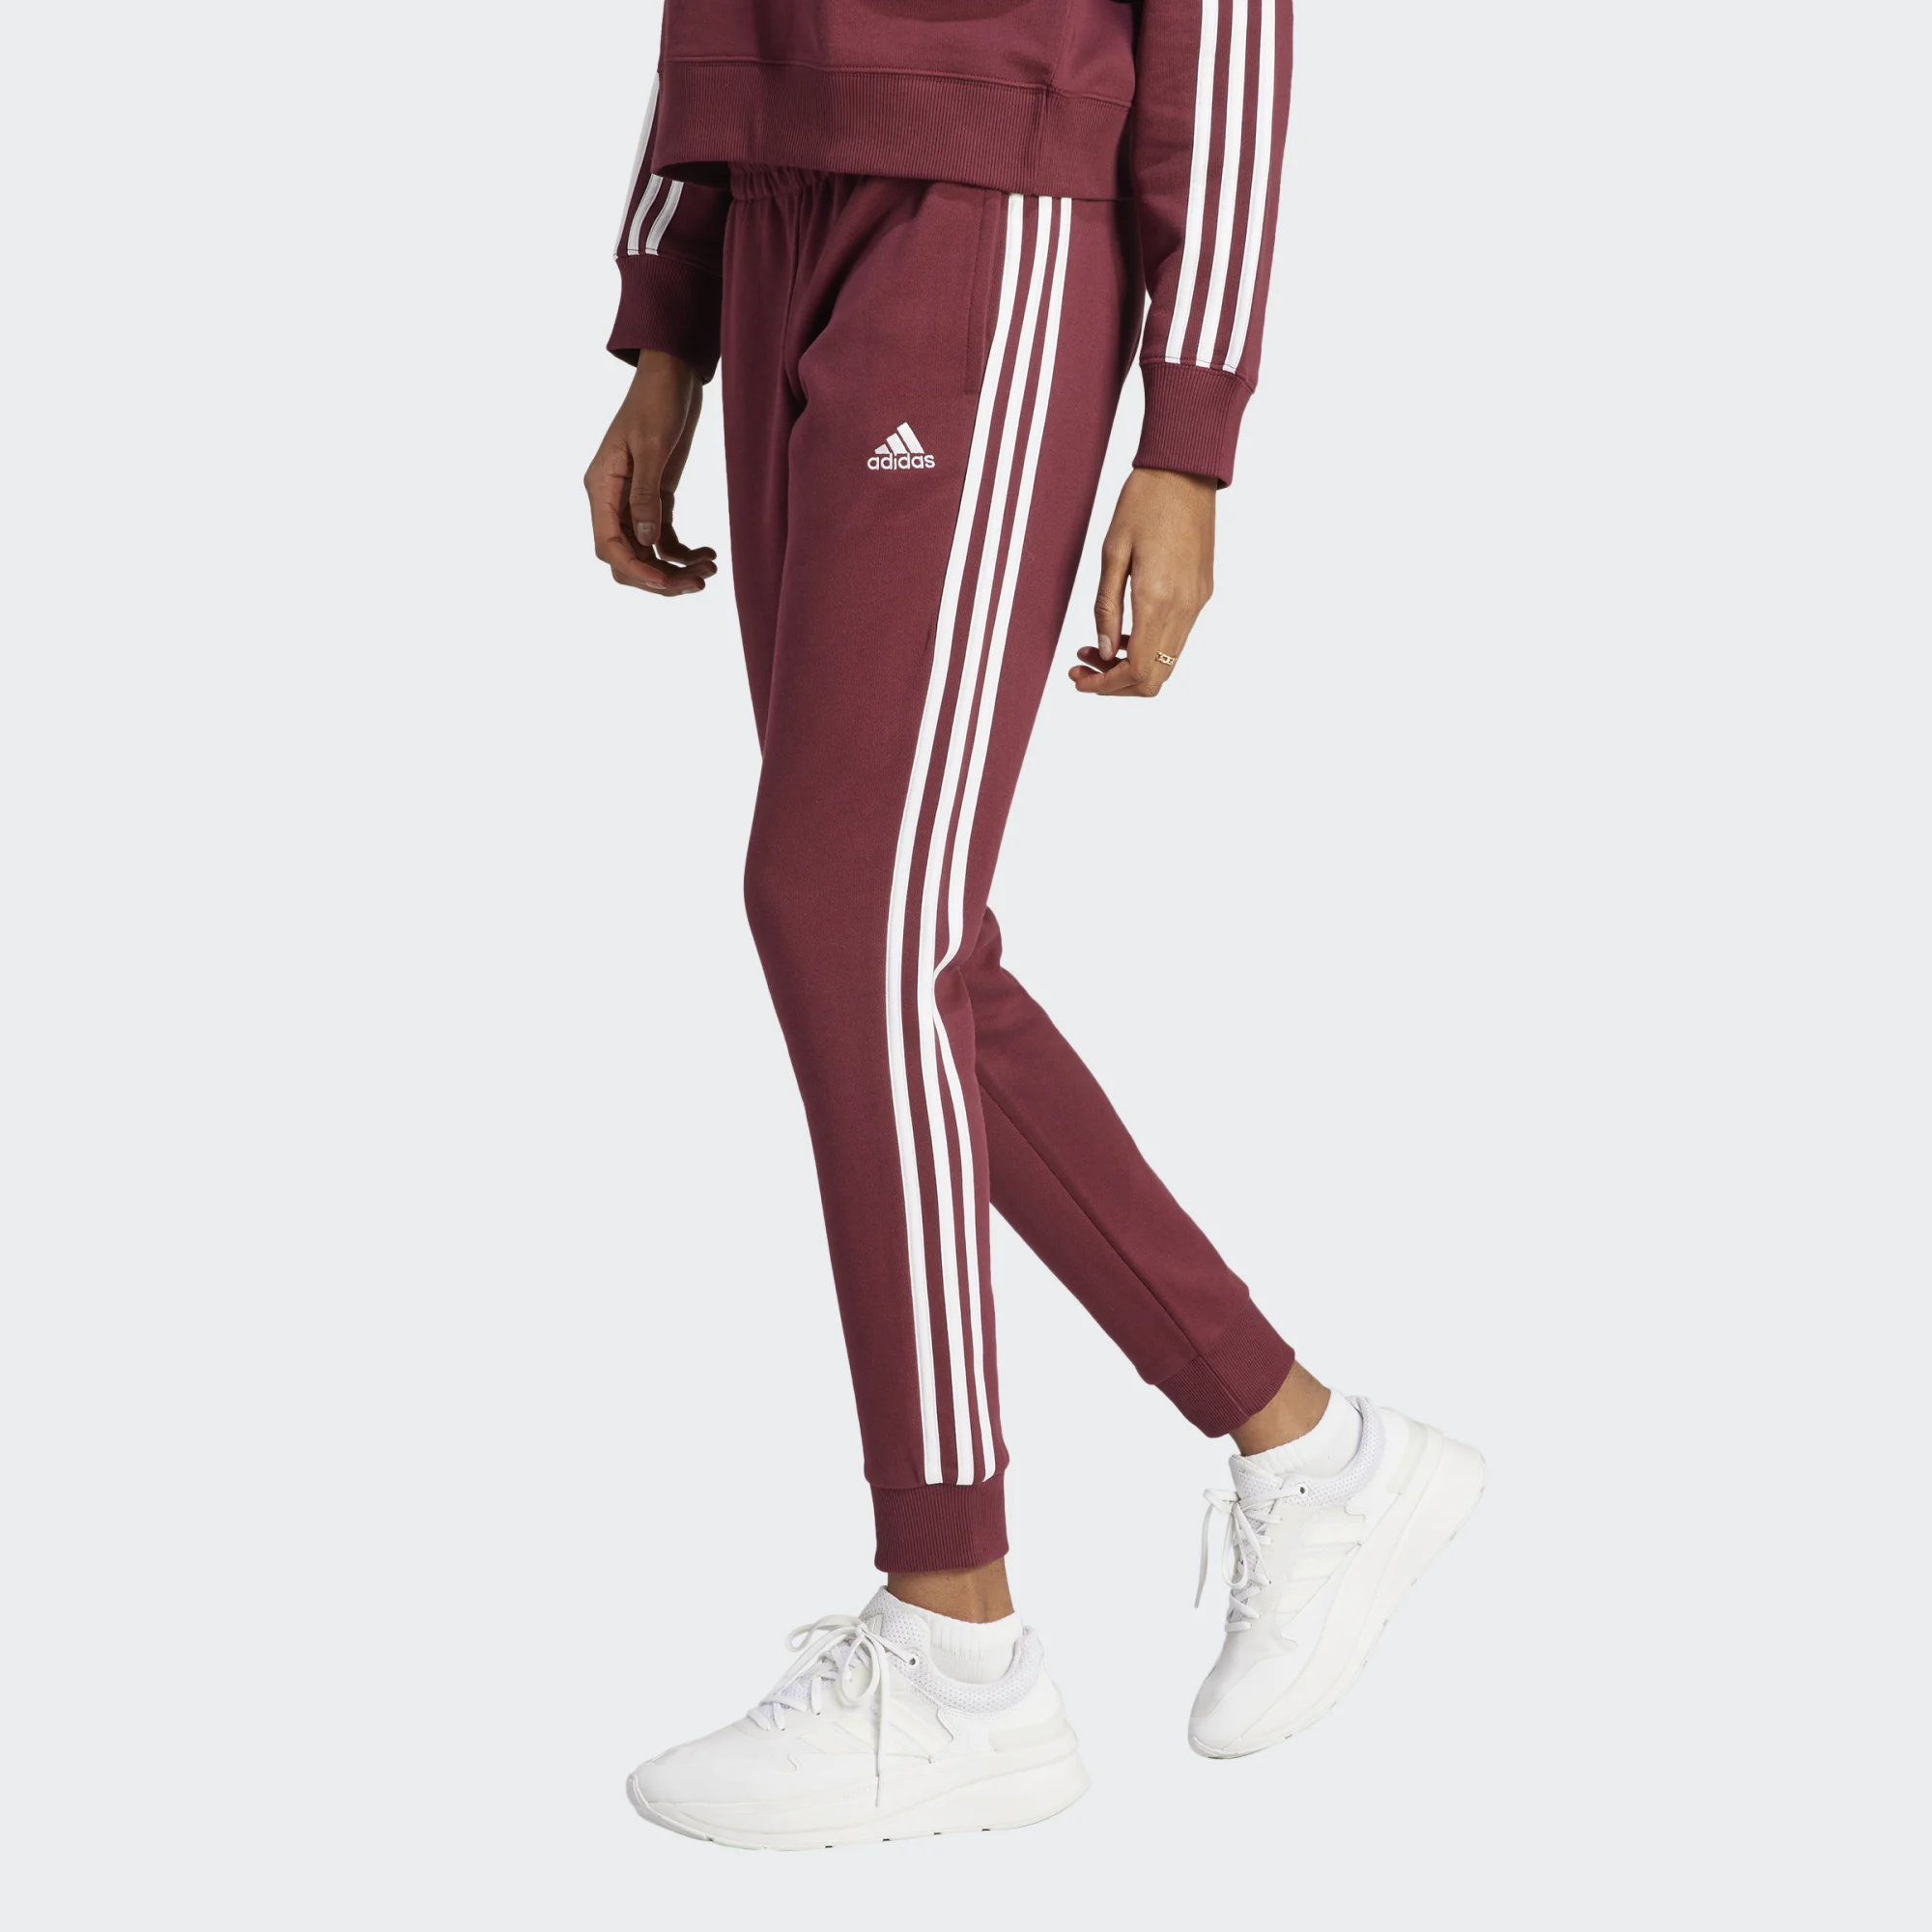 ADIDAS ESSENTIALS 3-STRIPES FRENCH TERRY WOMENS PANT